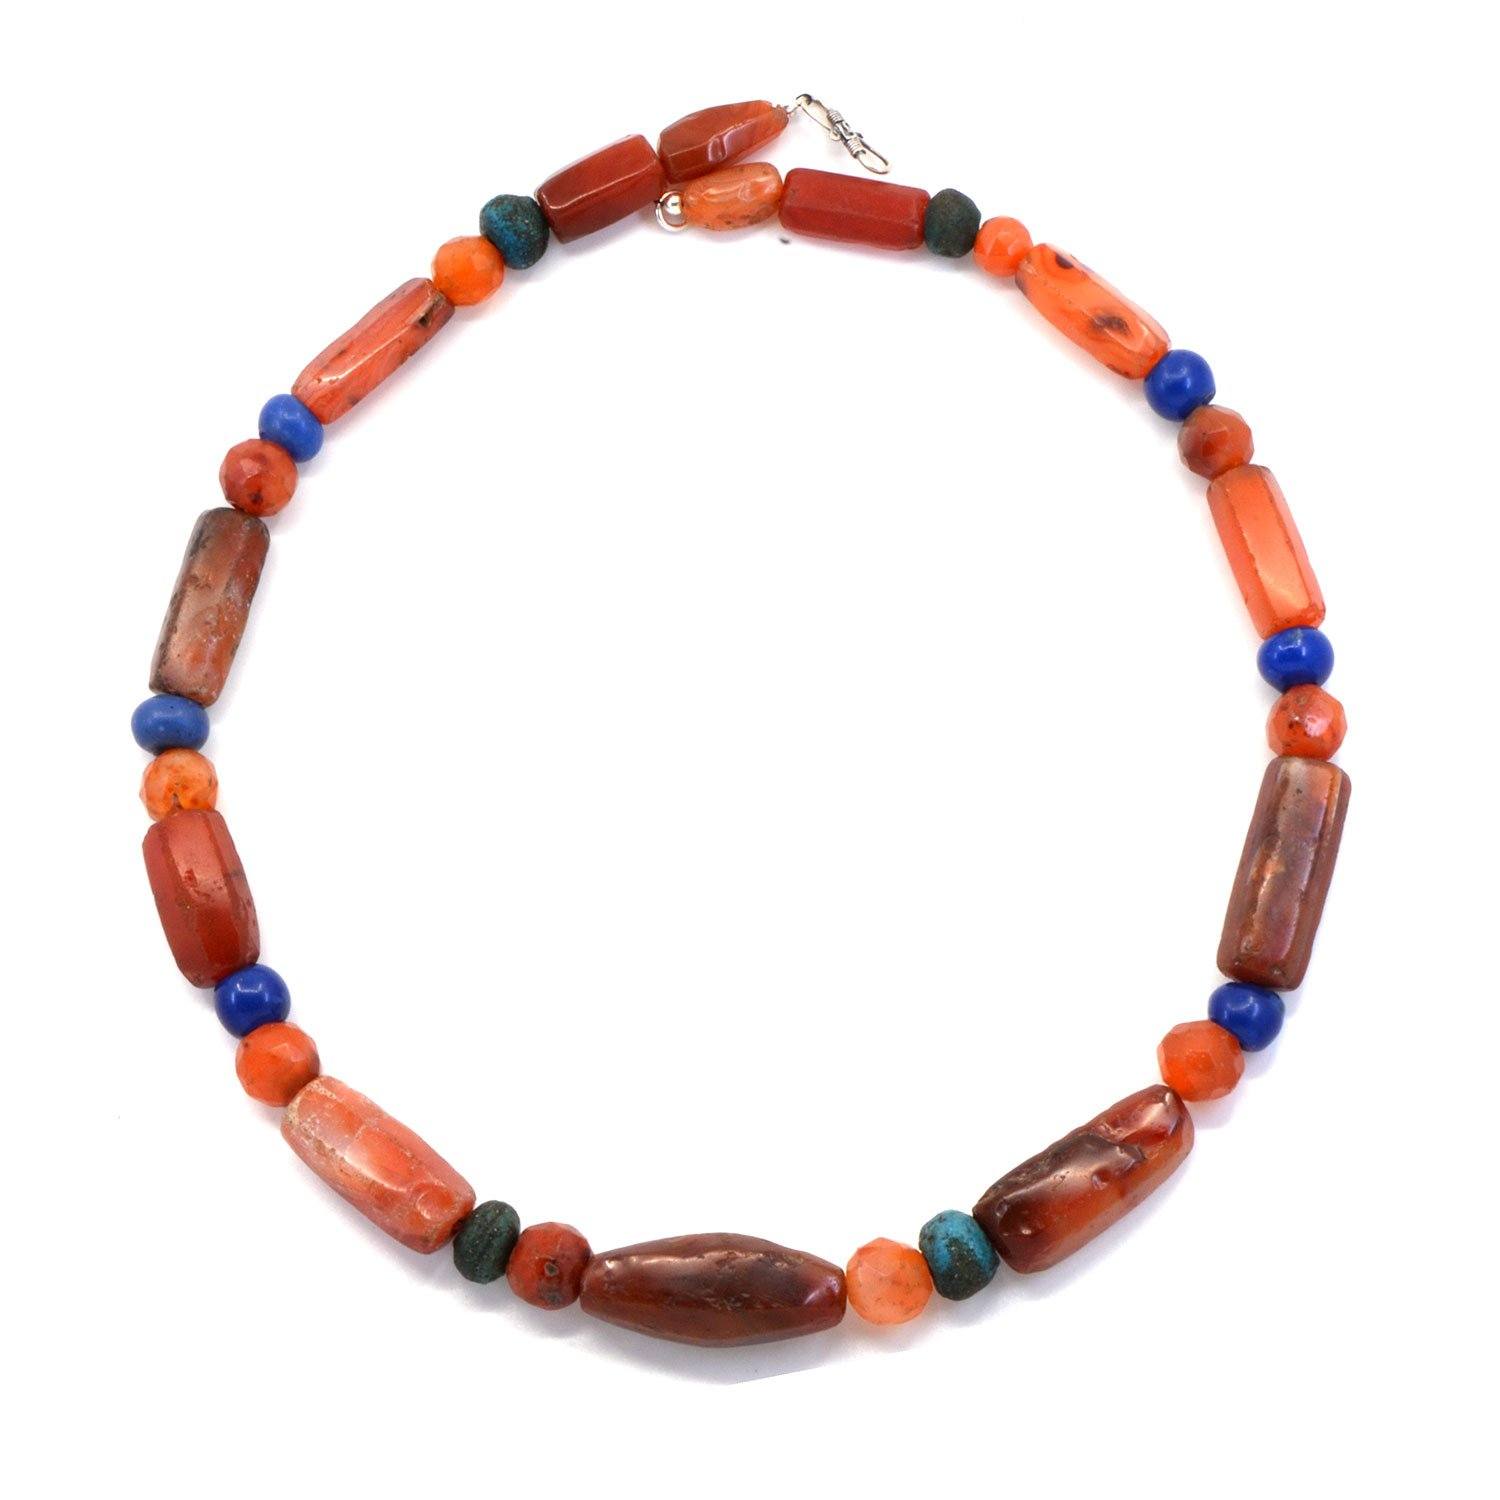 A Roman Carnelian & Glass Bead Necklace, Roman Imperial Period, ca. 3rd - 4th century CE - Sands of Time Ancient Art